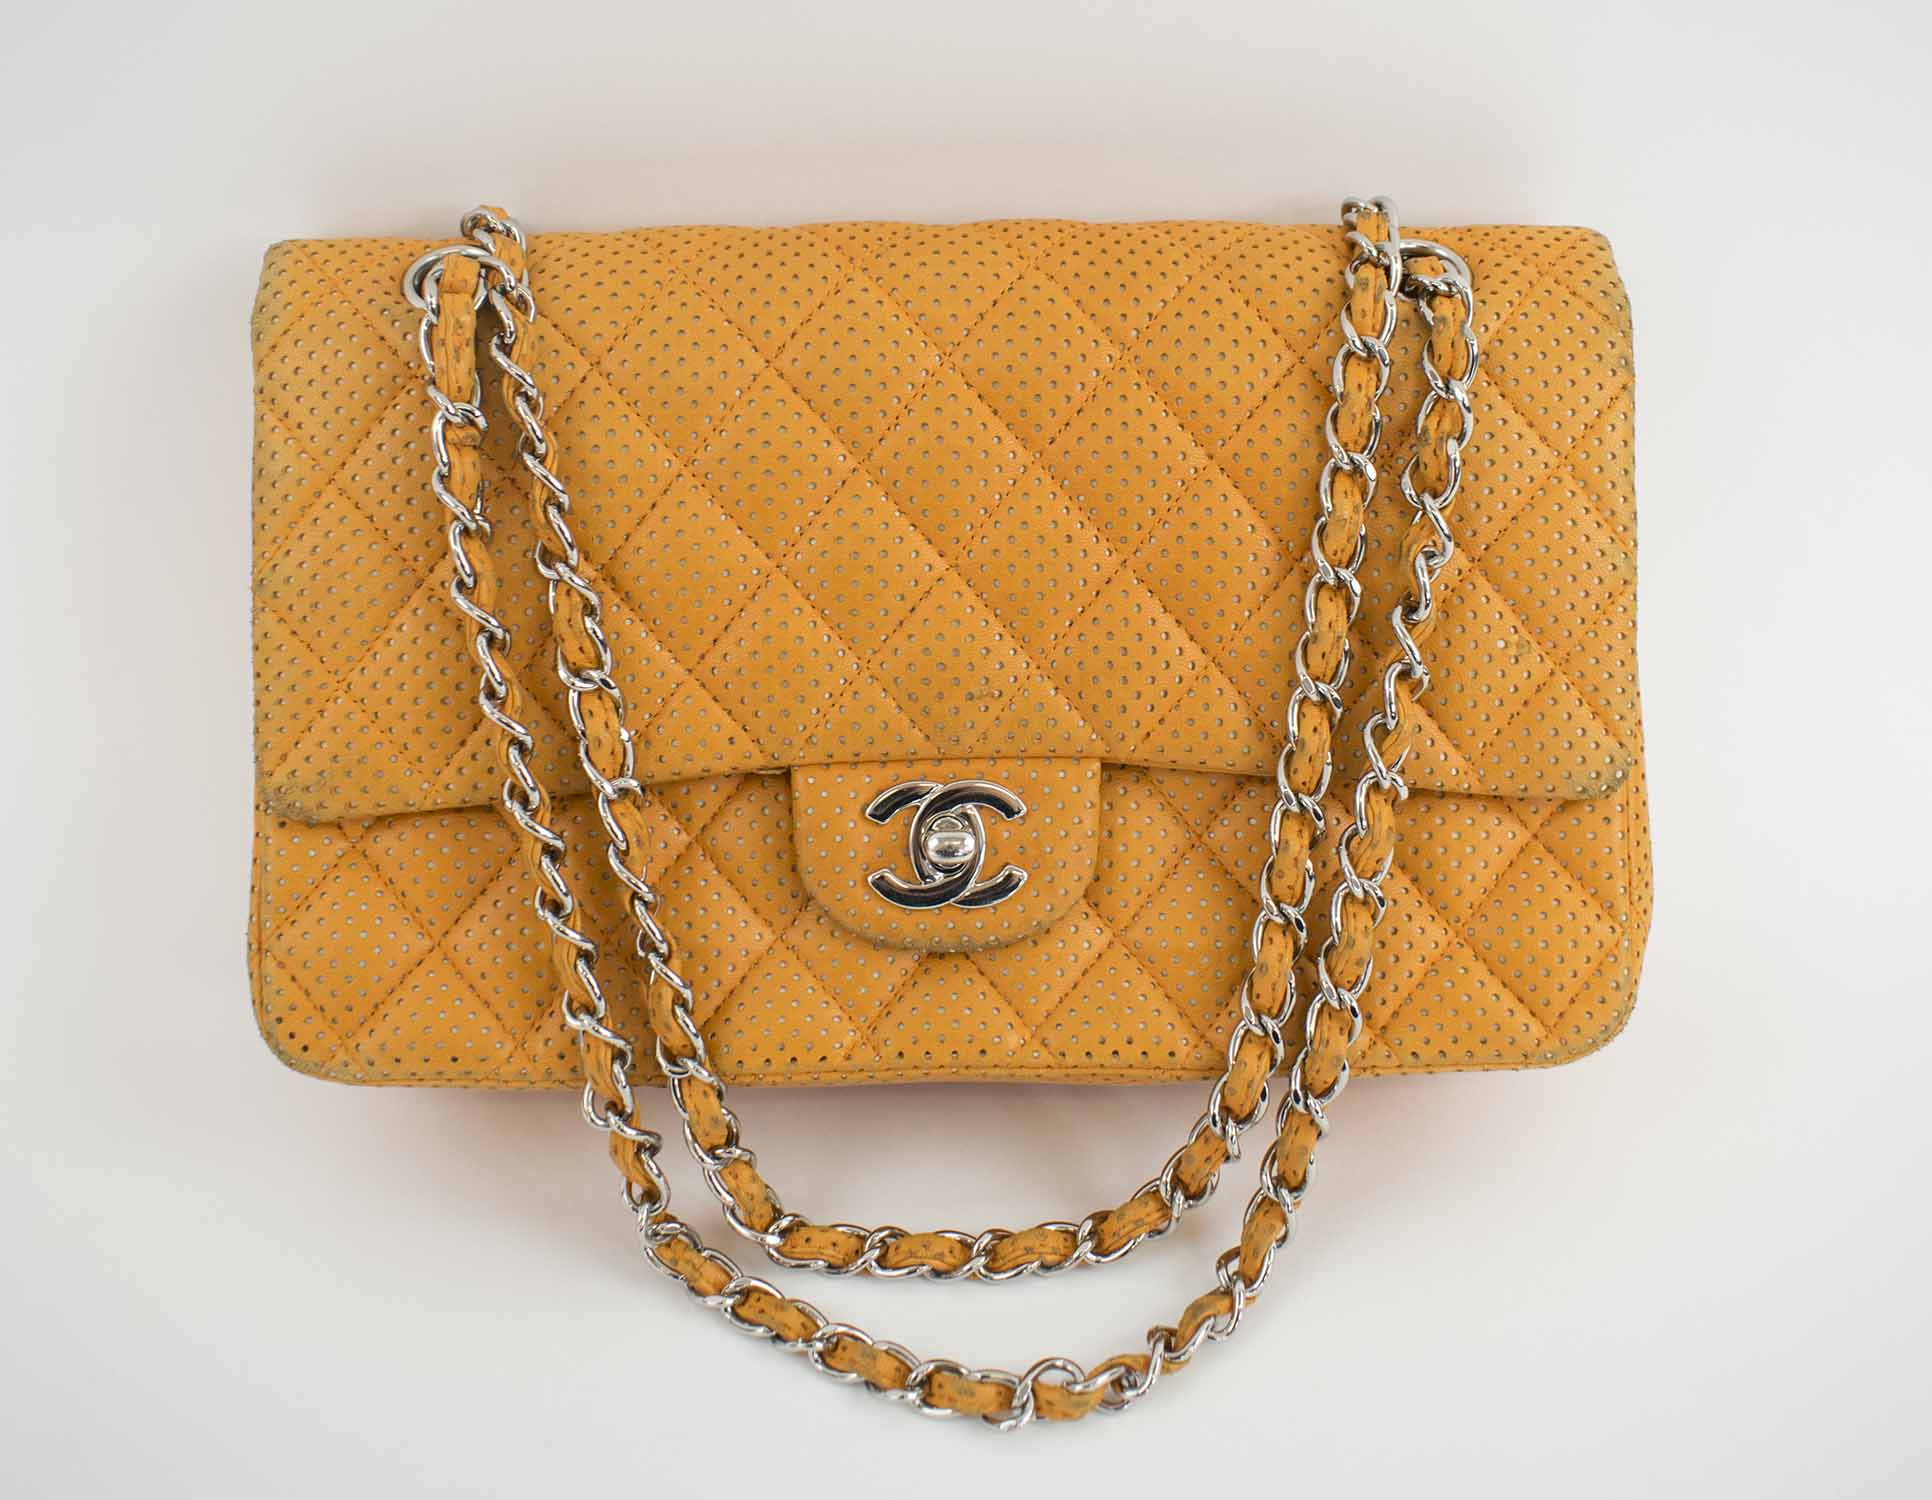 CHANEL LAMBSKIN PERFORATED DOUBLE FLAP BAG, with iconic diamond